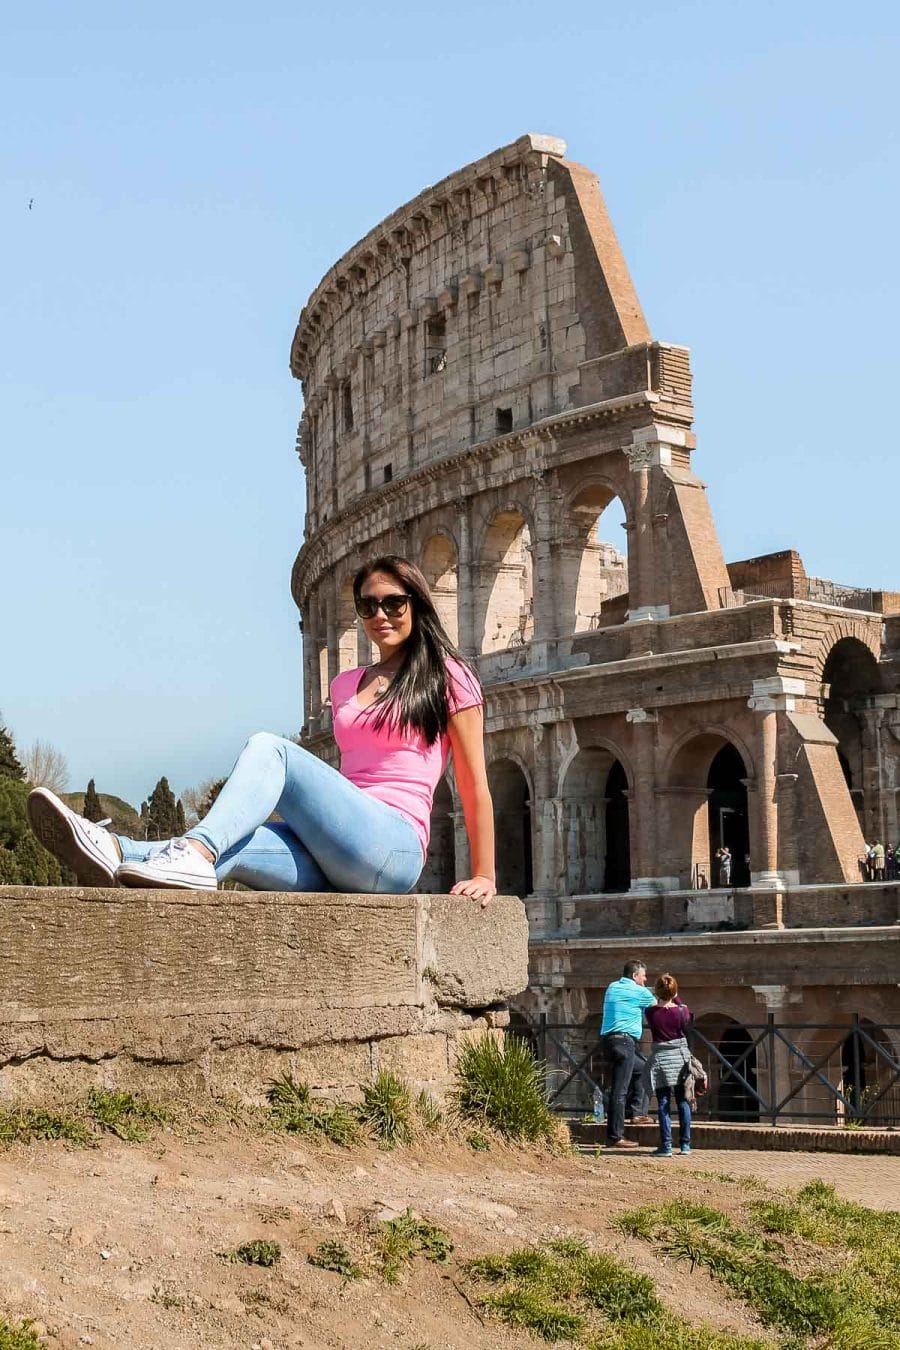 Girl in a pink skirt sitting in front of the Colosseum in Rome, Italy